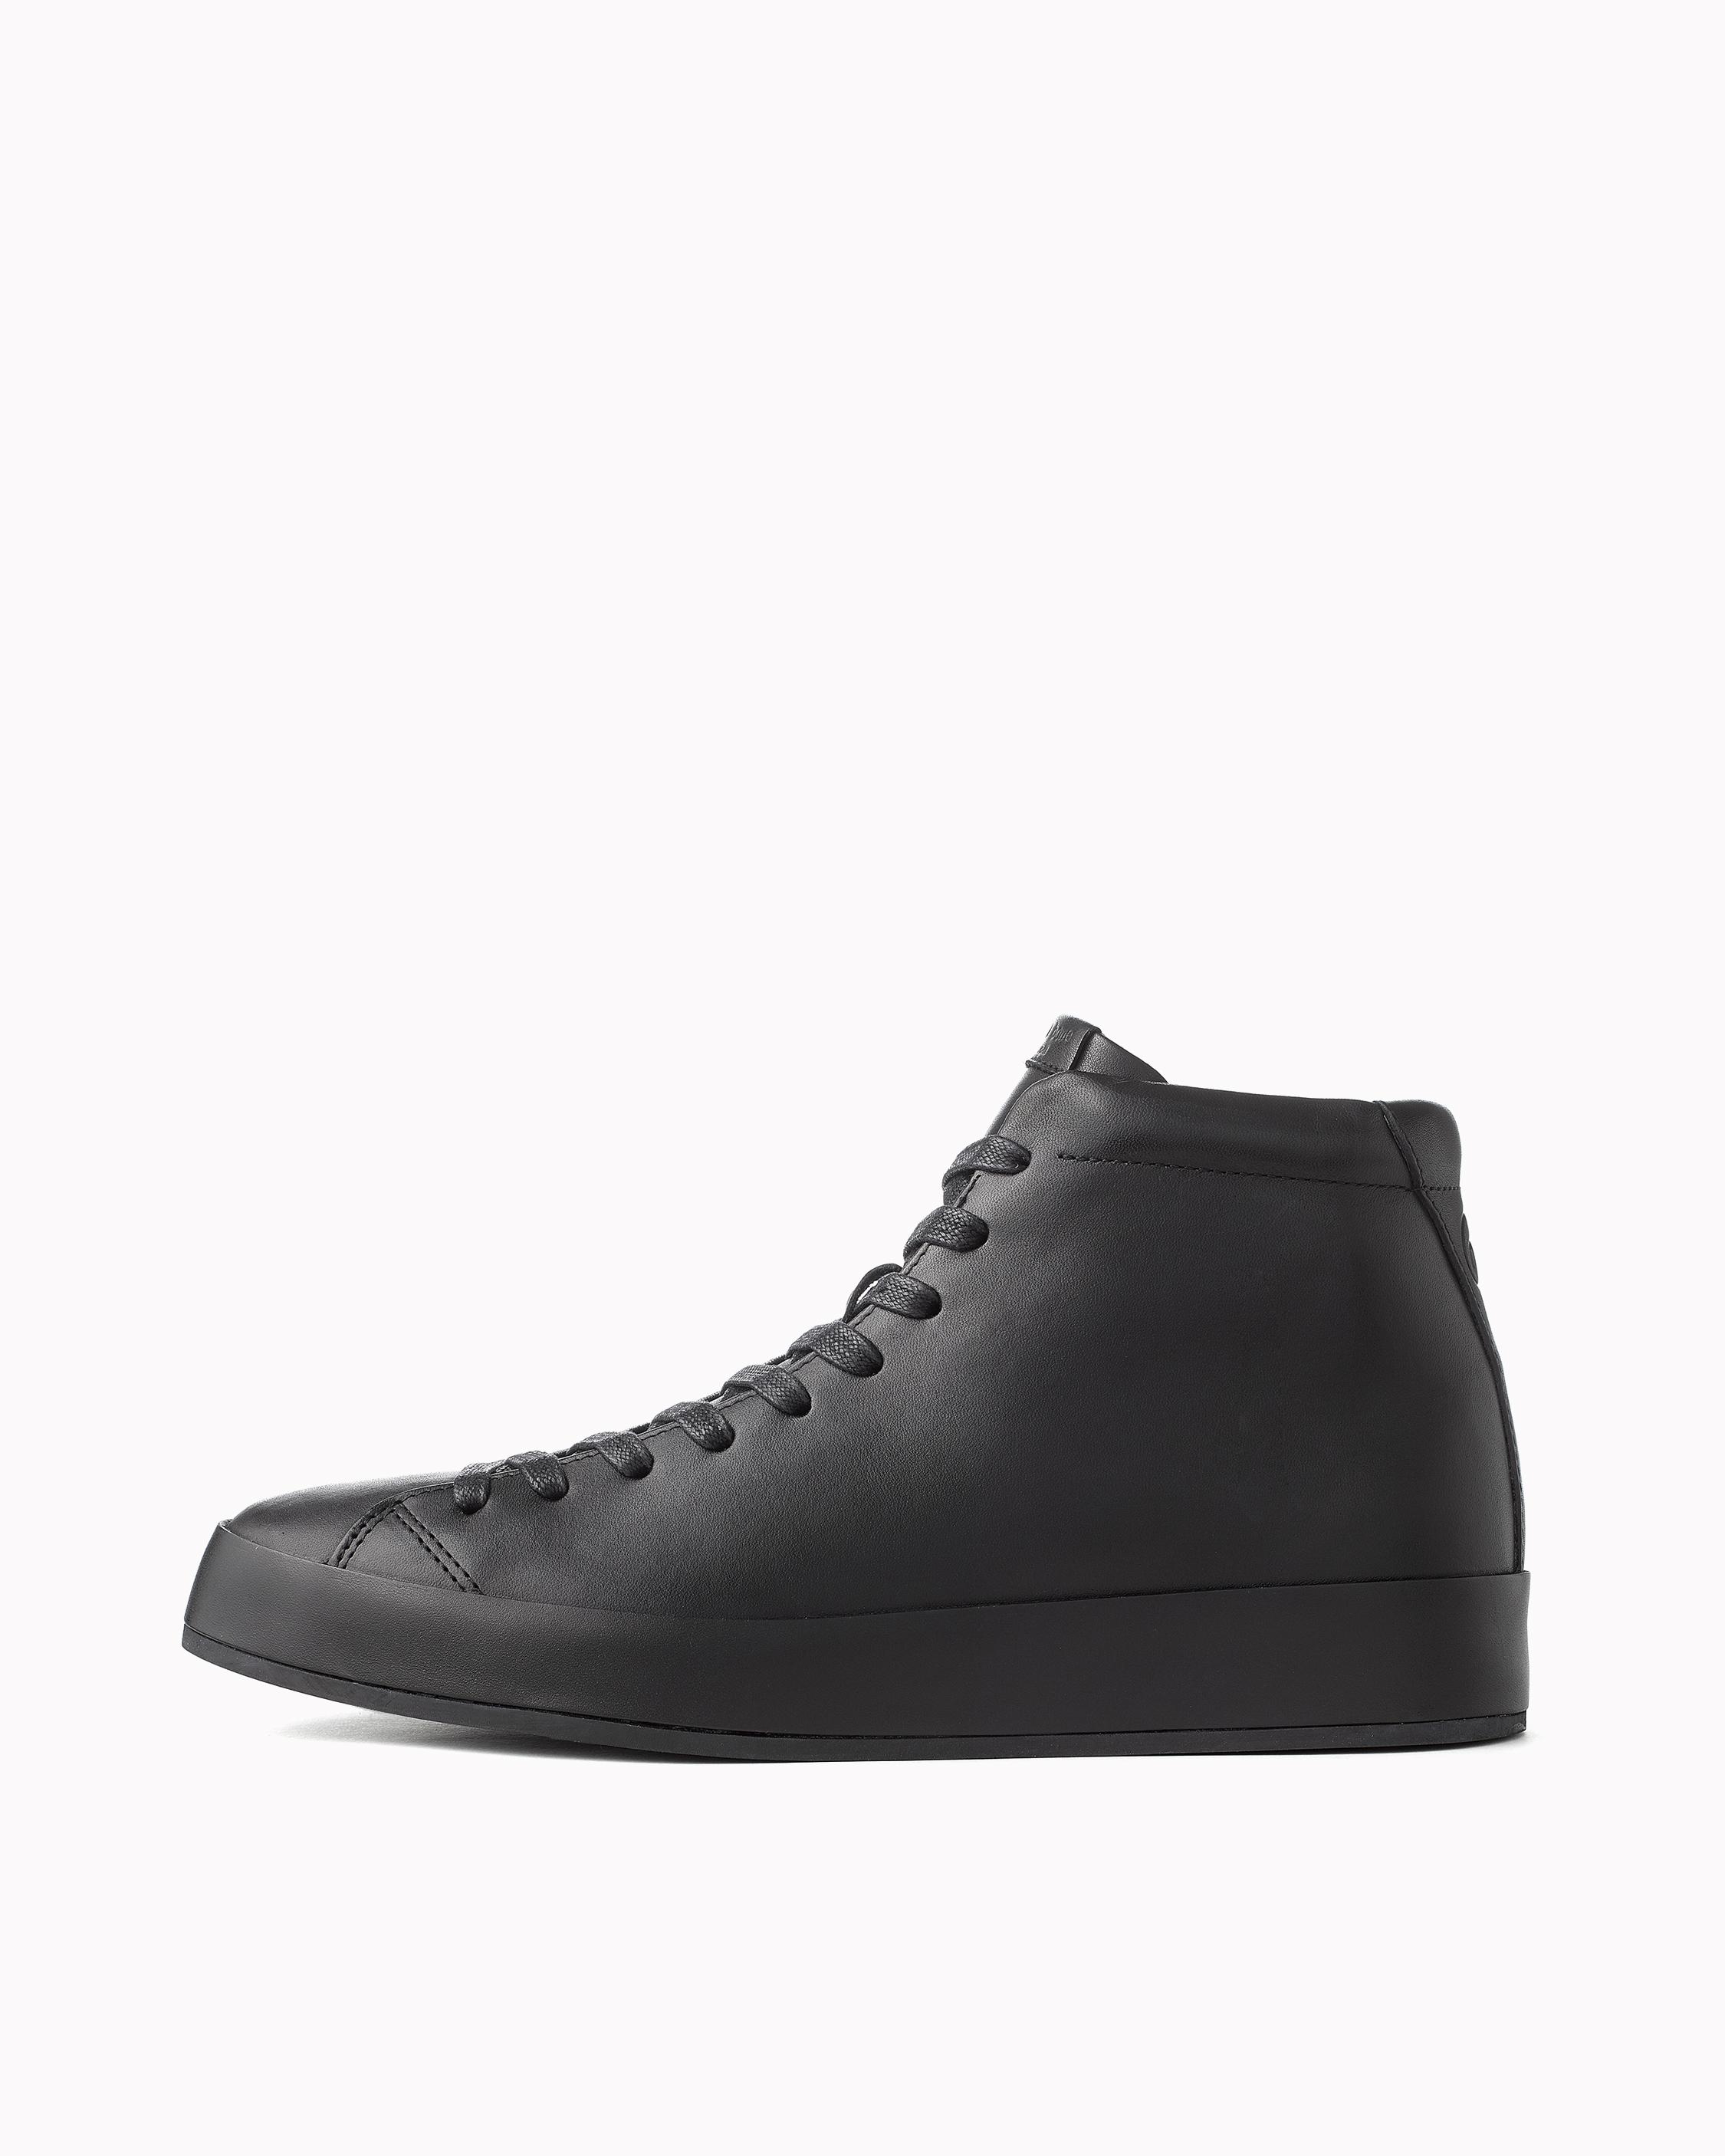 Men's Designer Shoes: Boots to Loafers to Sneakers in Leather, Suede ...